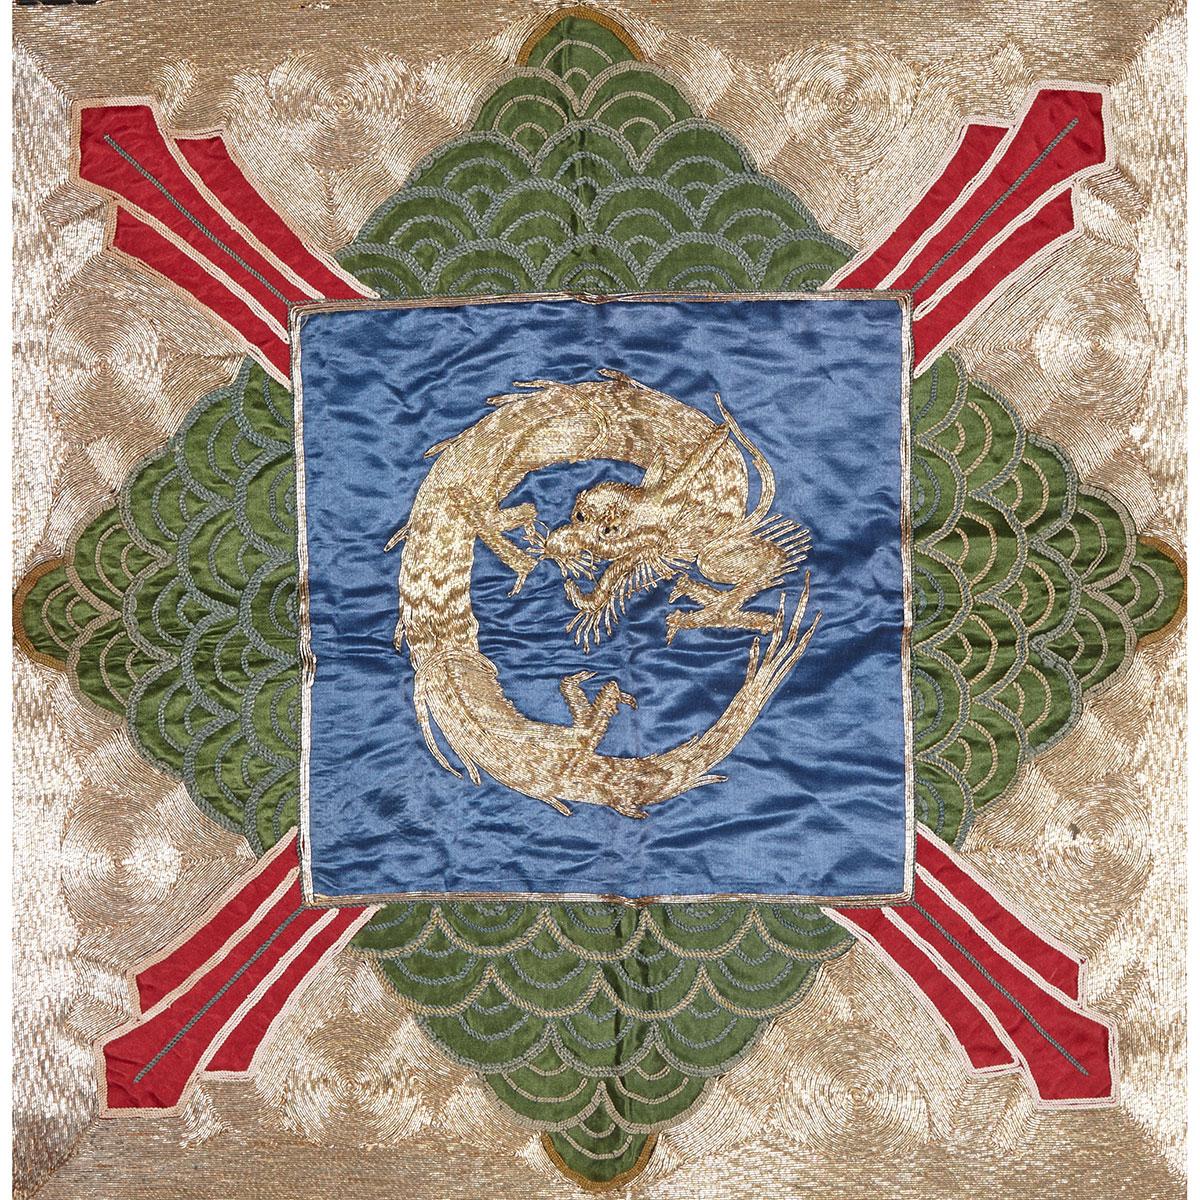 Silk Embroidered Red Ground Dragon Panel, Early to Mid 20th Century